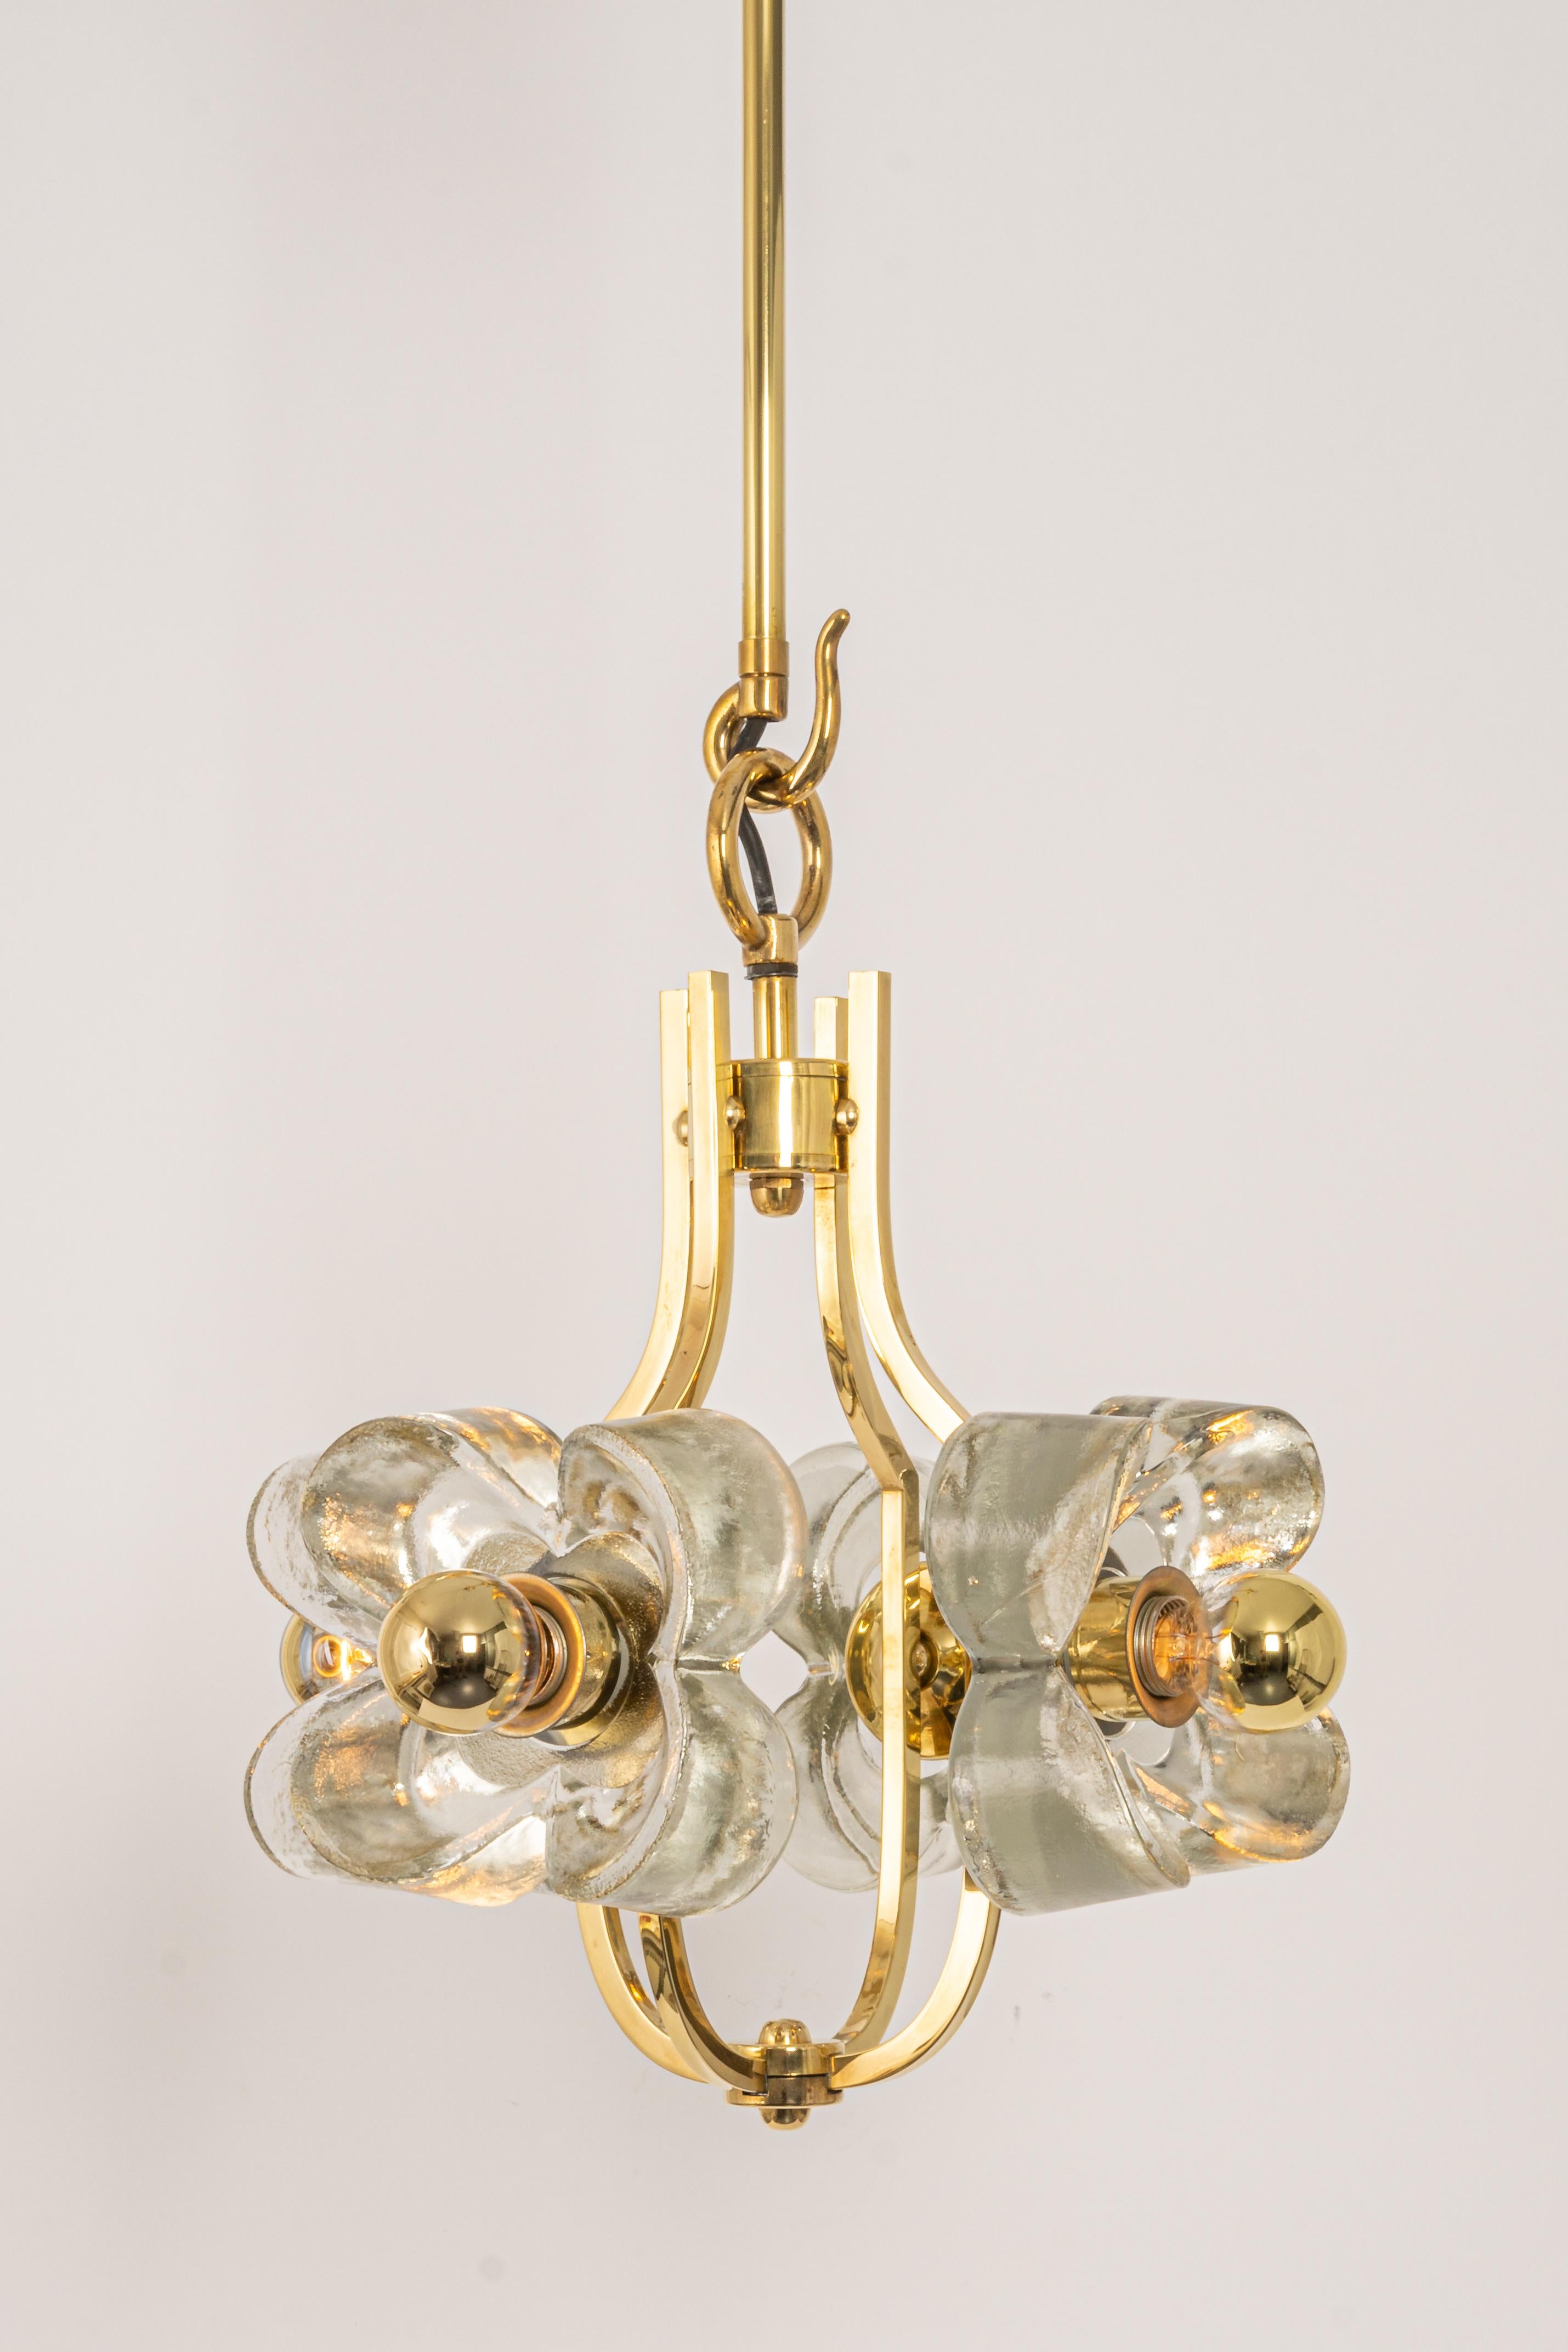 A wonderful petite and high-quality gilded chandelier/pendant light fixture by Sische, Germany, 1970s

It is made of a brass frame decorated with 4 crystal glasses.
The lamp takes 4 small base bulbs (max. 40W per bulb).
Light bulbs are not